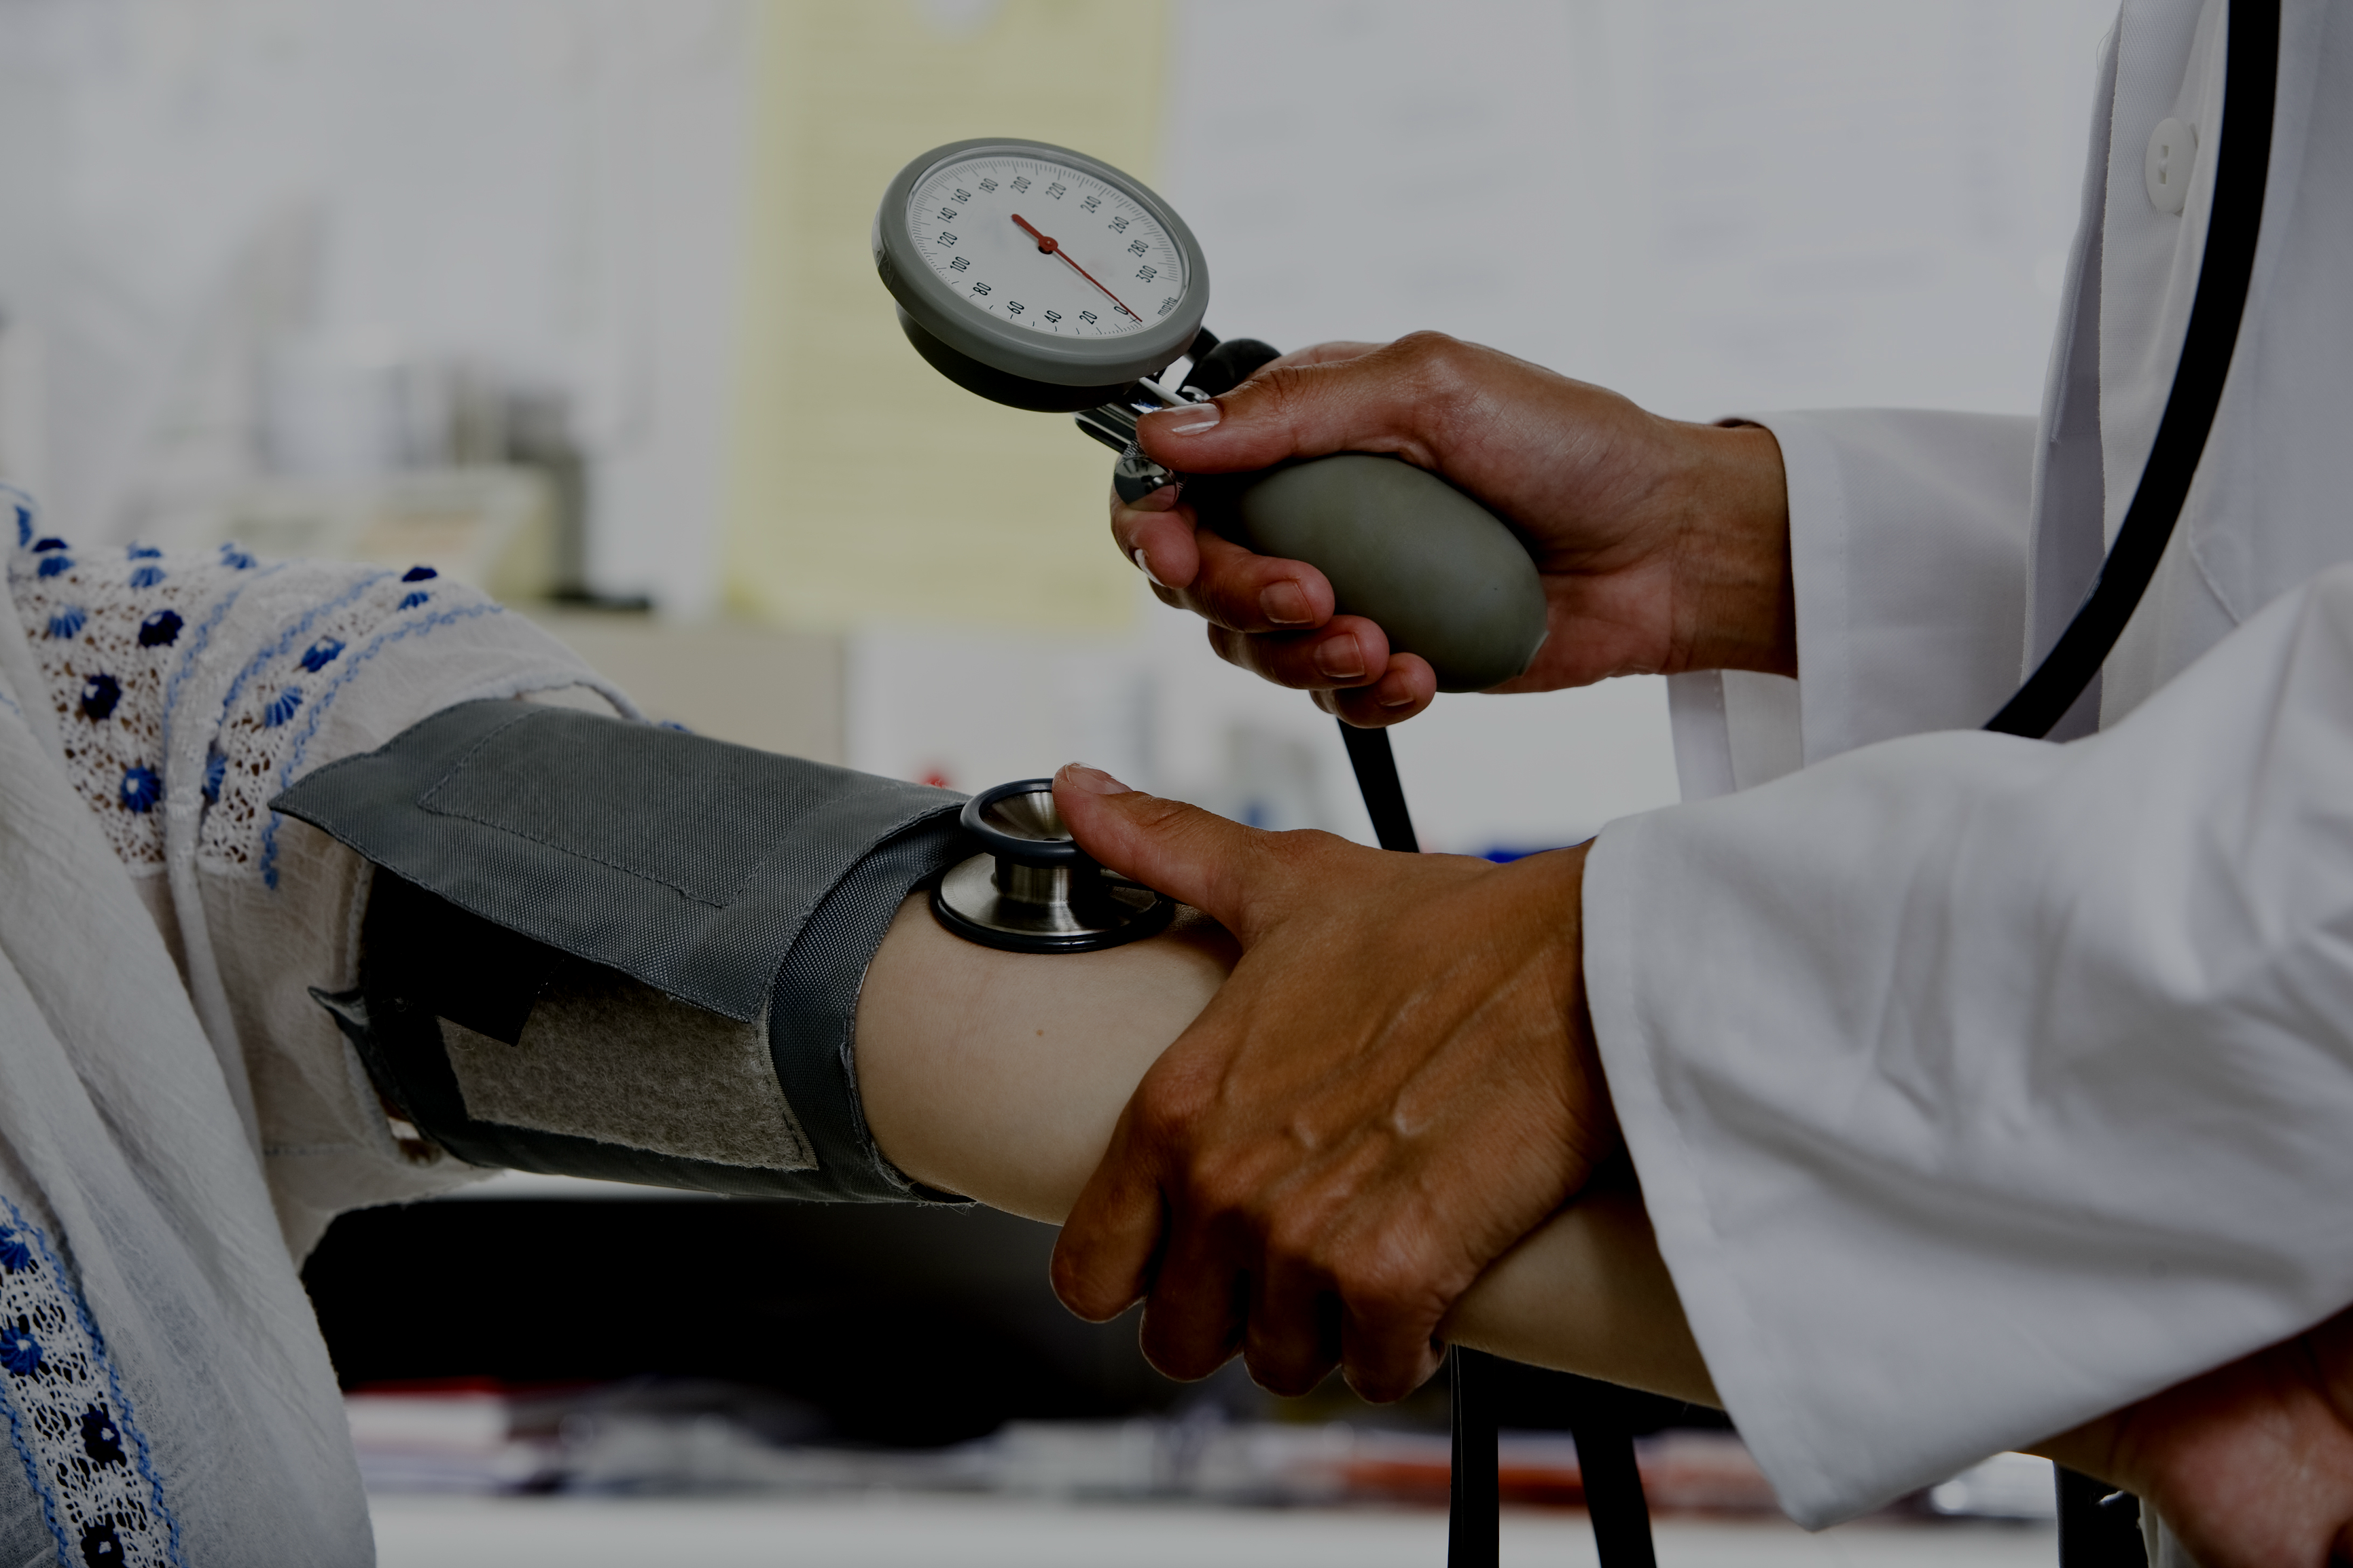 1 in 3 American adults have high blood pressure.